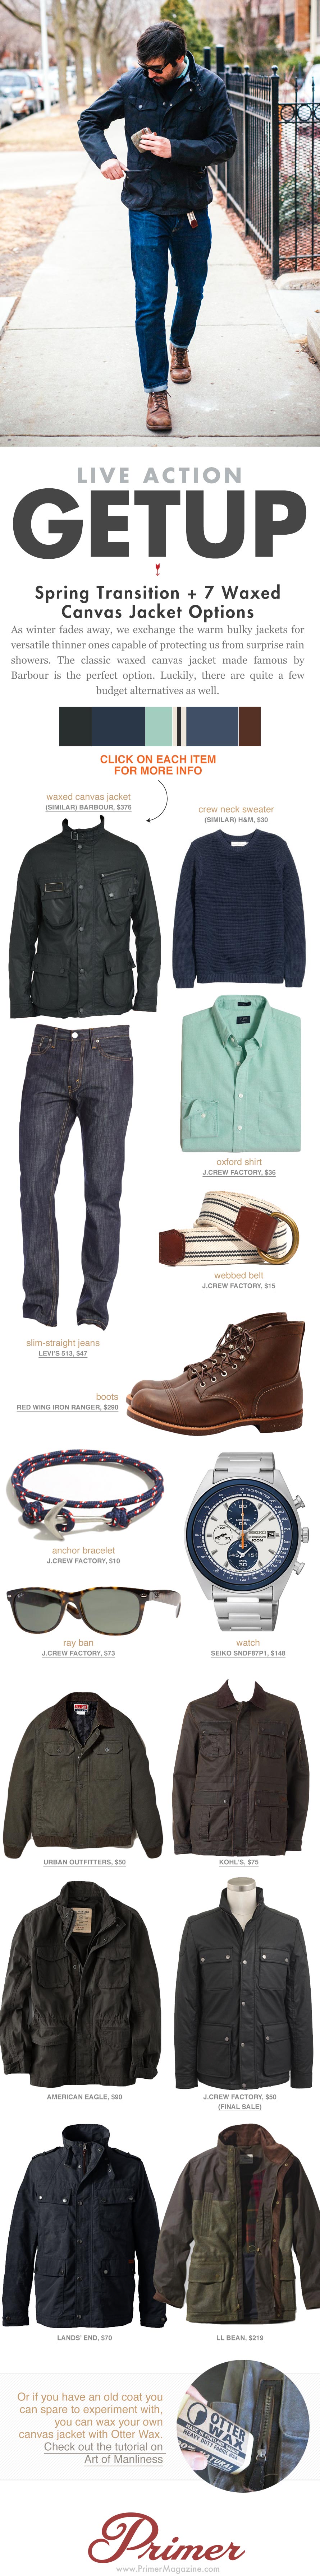 Getup Spring Transition - Jacket, oxford shirt, slim jeans, and Iron Ranger boots